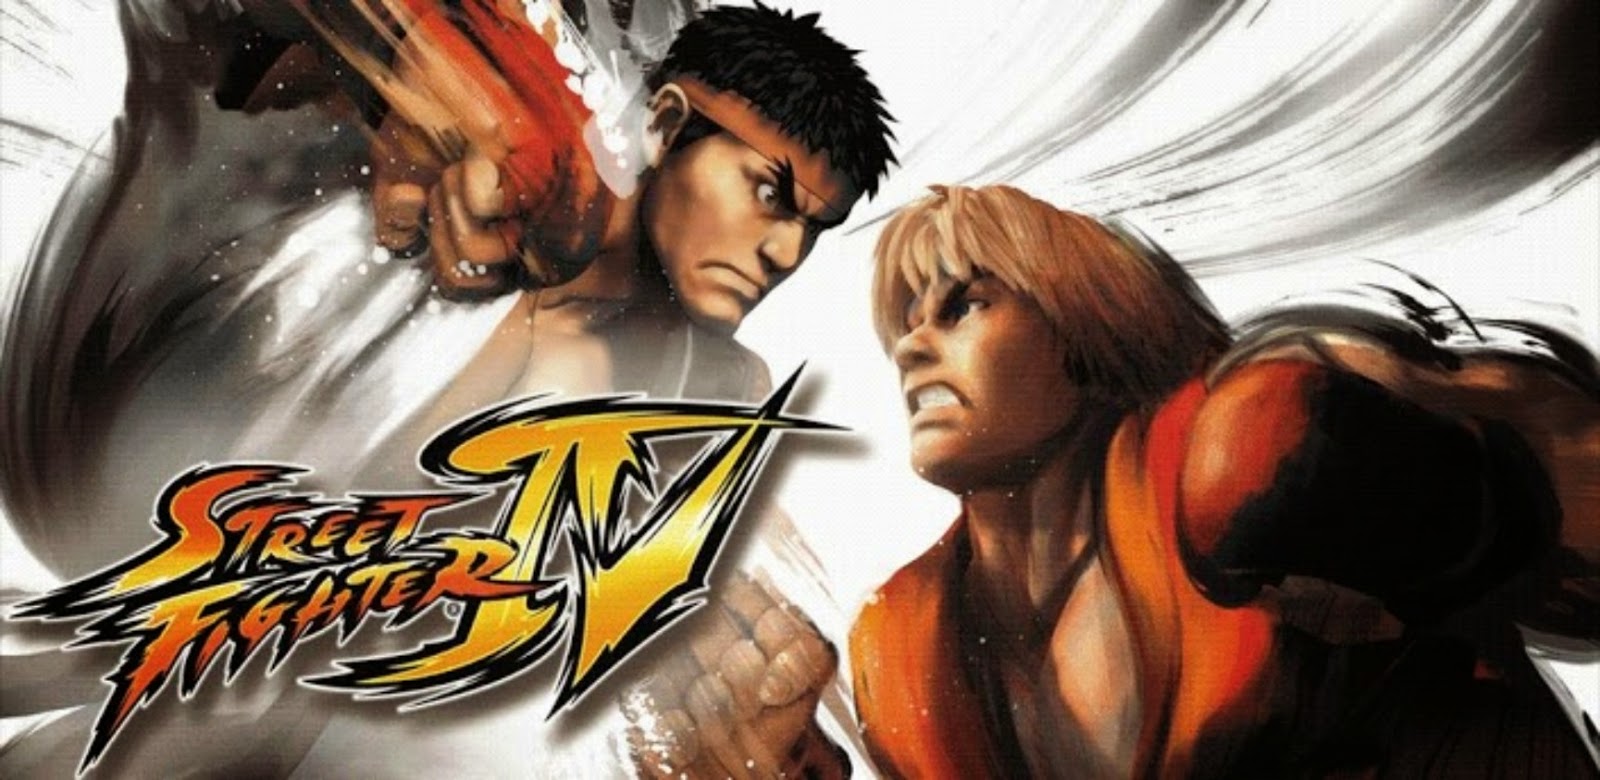 STREET FIGHTER IV HD Apk Data Android Games